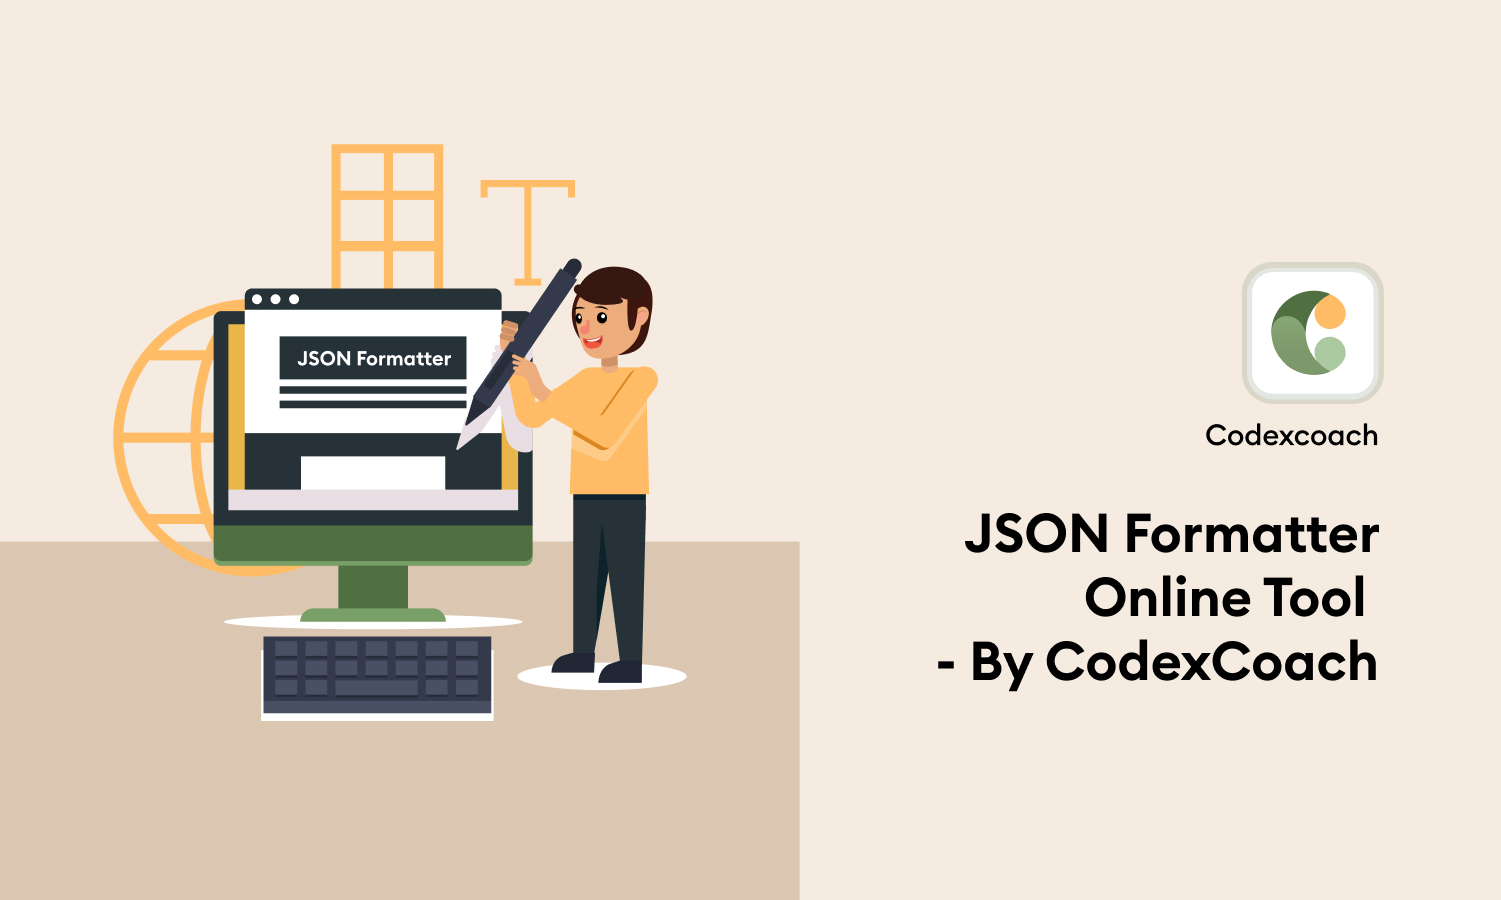 JSON Formatter Online Tool - By CodexCoach